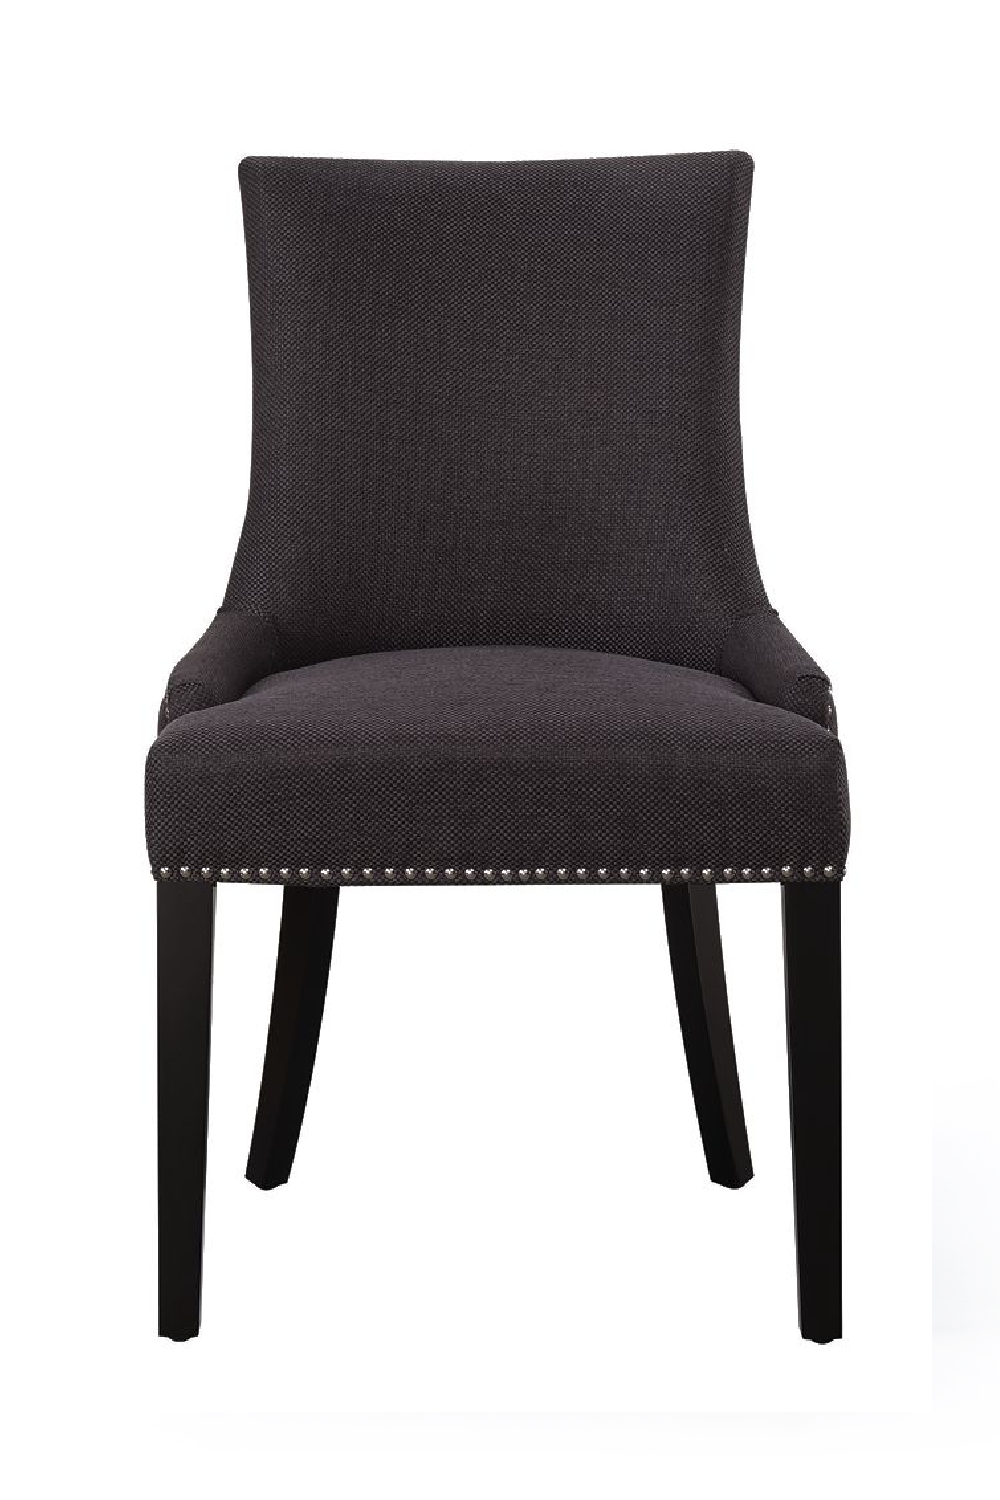 Black Scooped Back Dining Chair | Andrew Martin Theodore | OROA